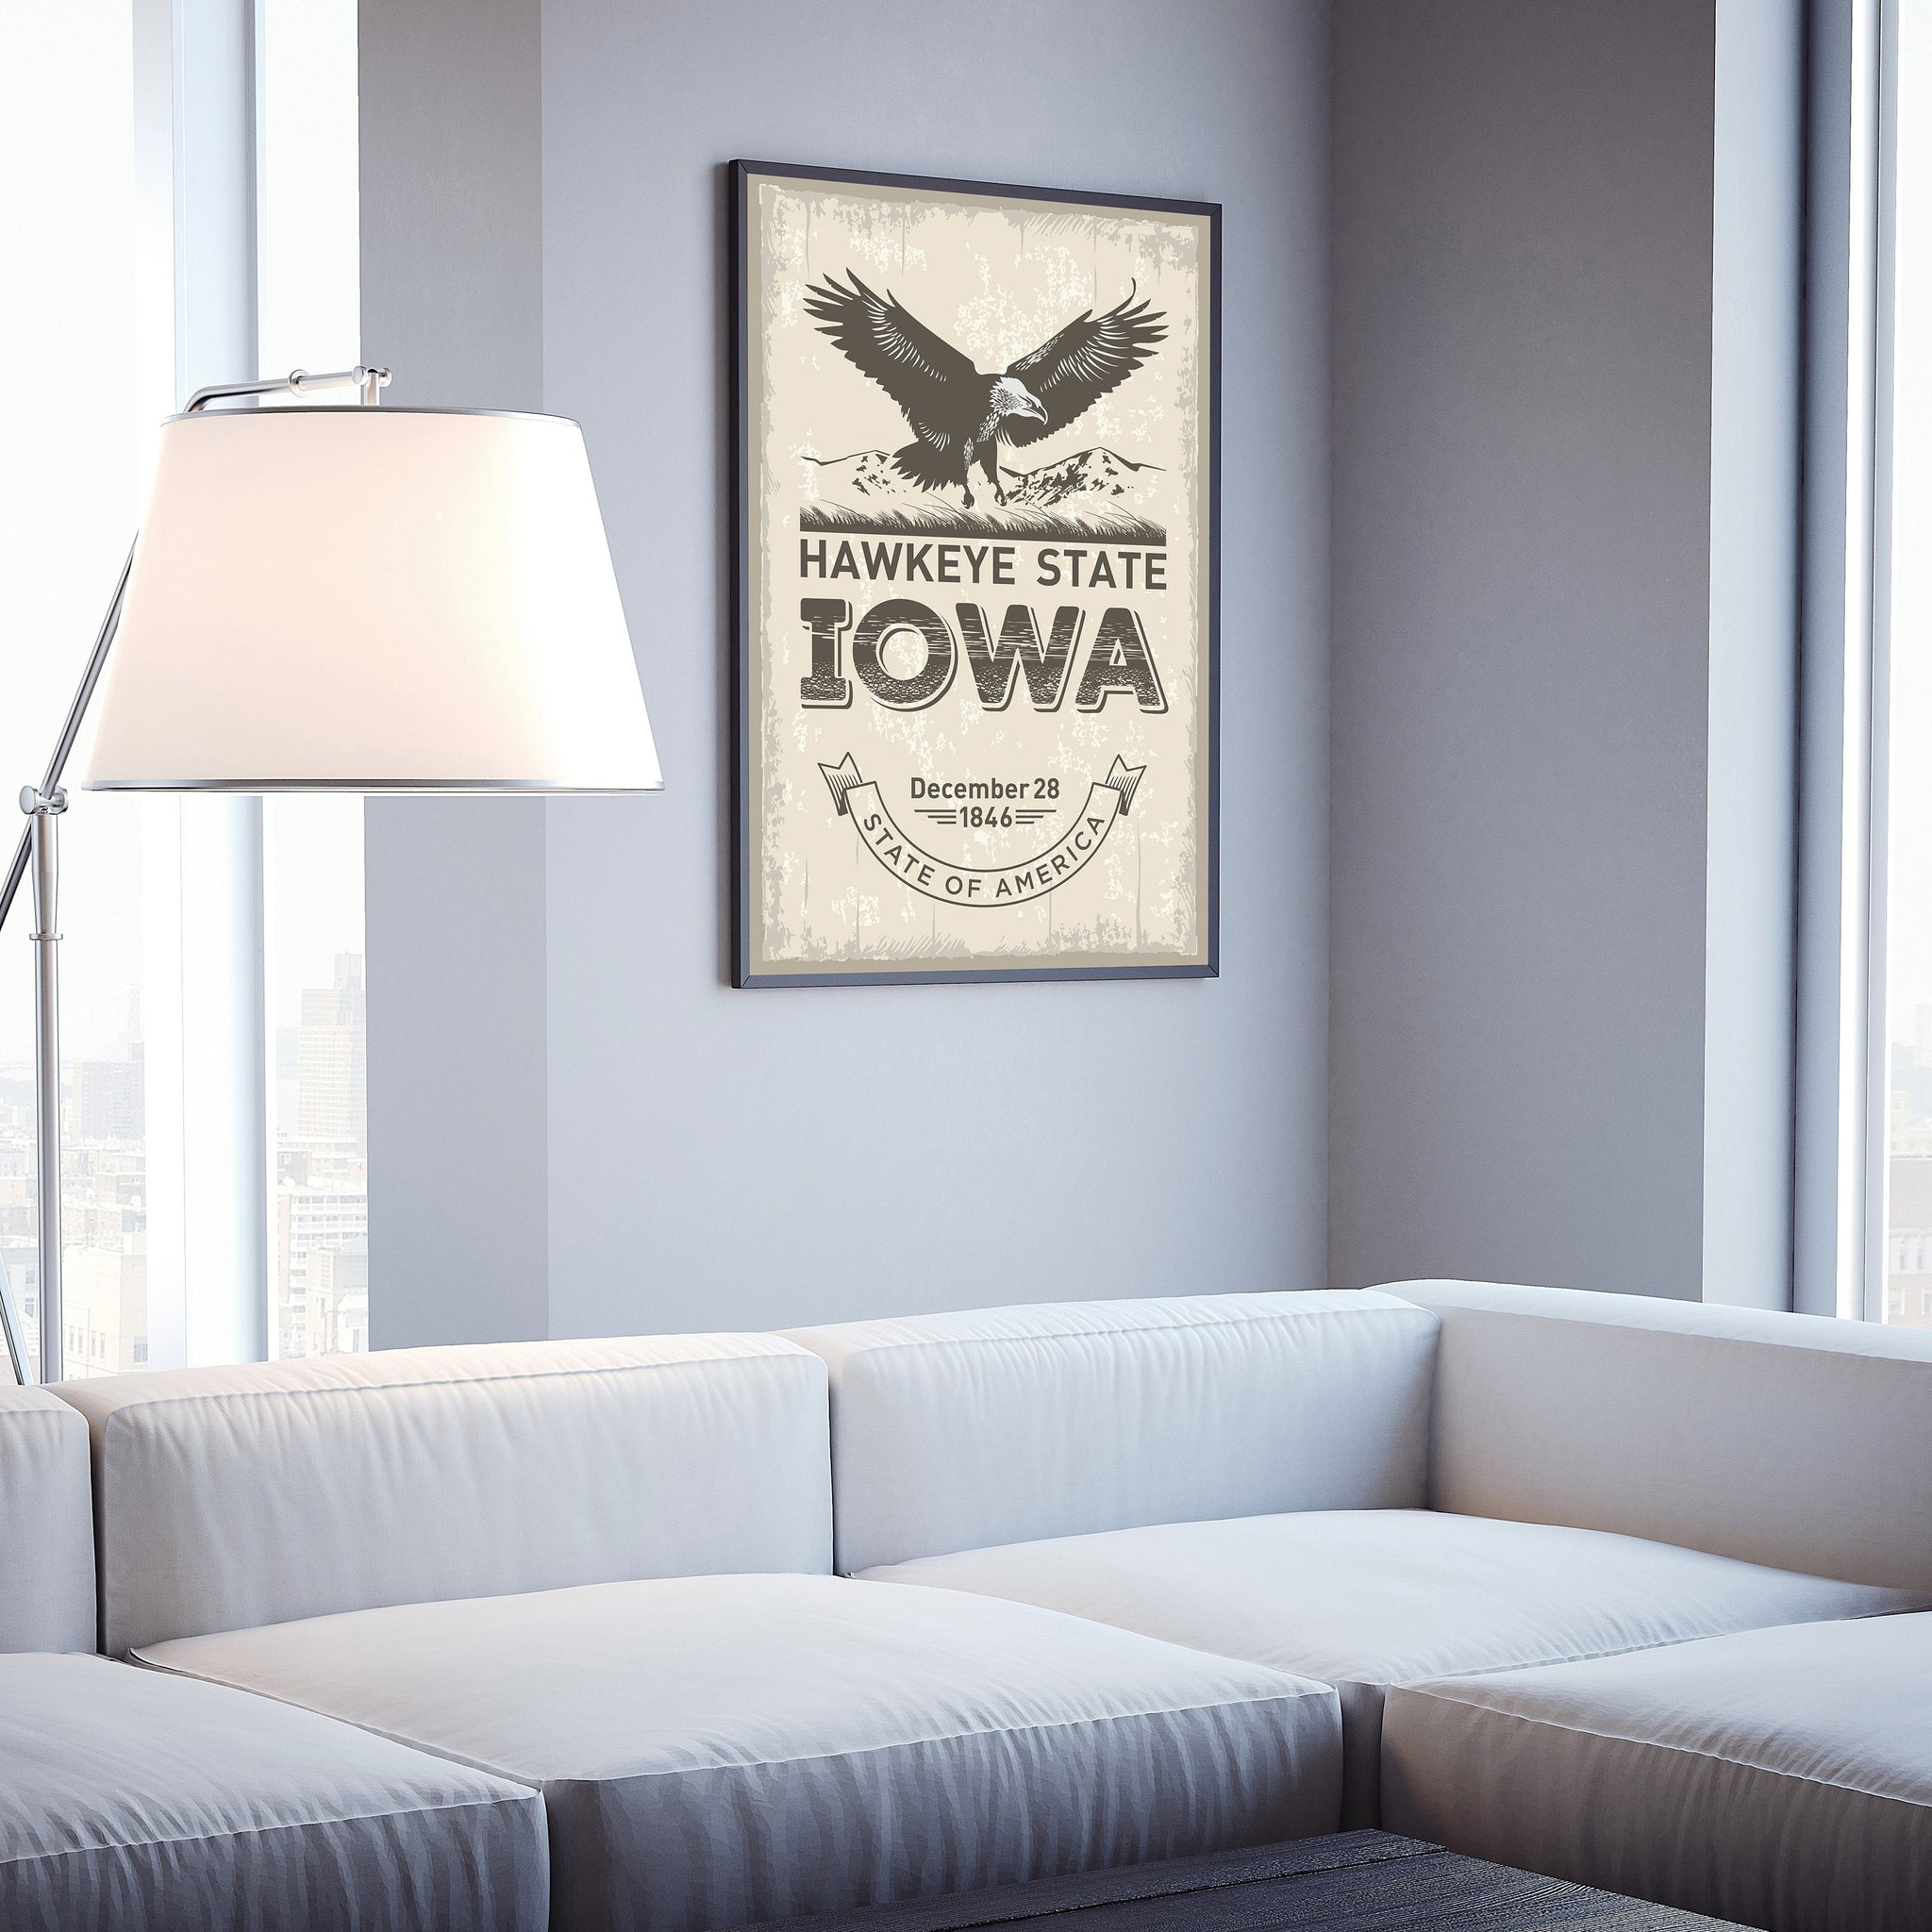 Iowa State Symbol Poster, Iowa State Poster Print, Iowa State Emblem Poster, Retro Travel State Poster, Home and Office Wall Art